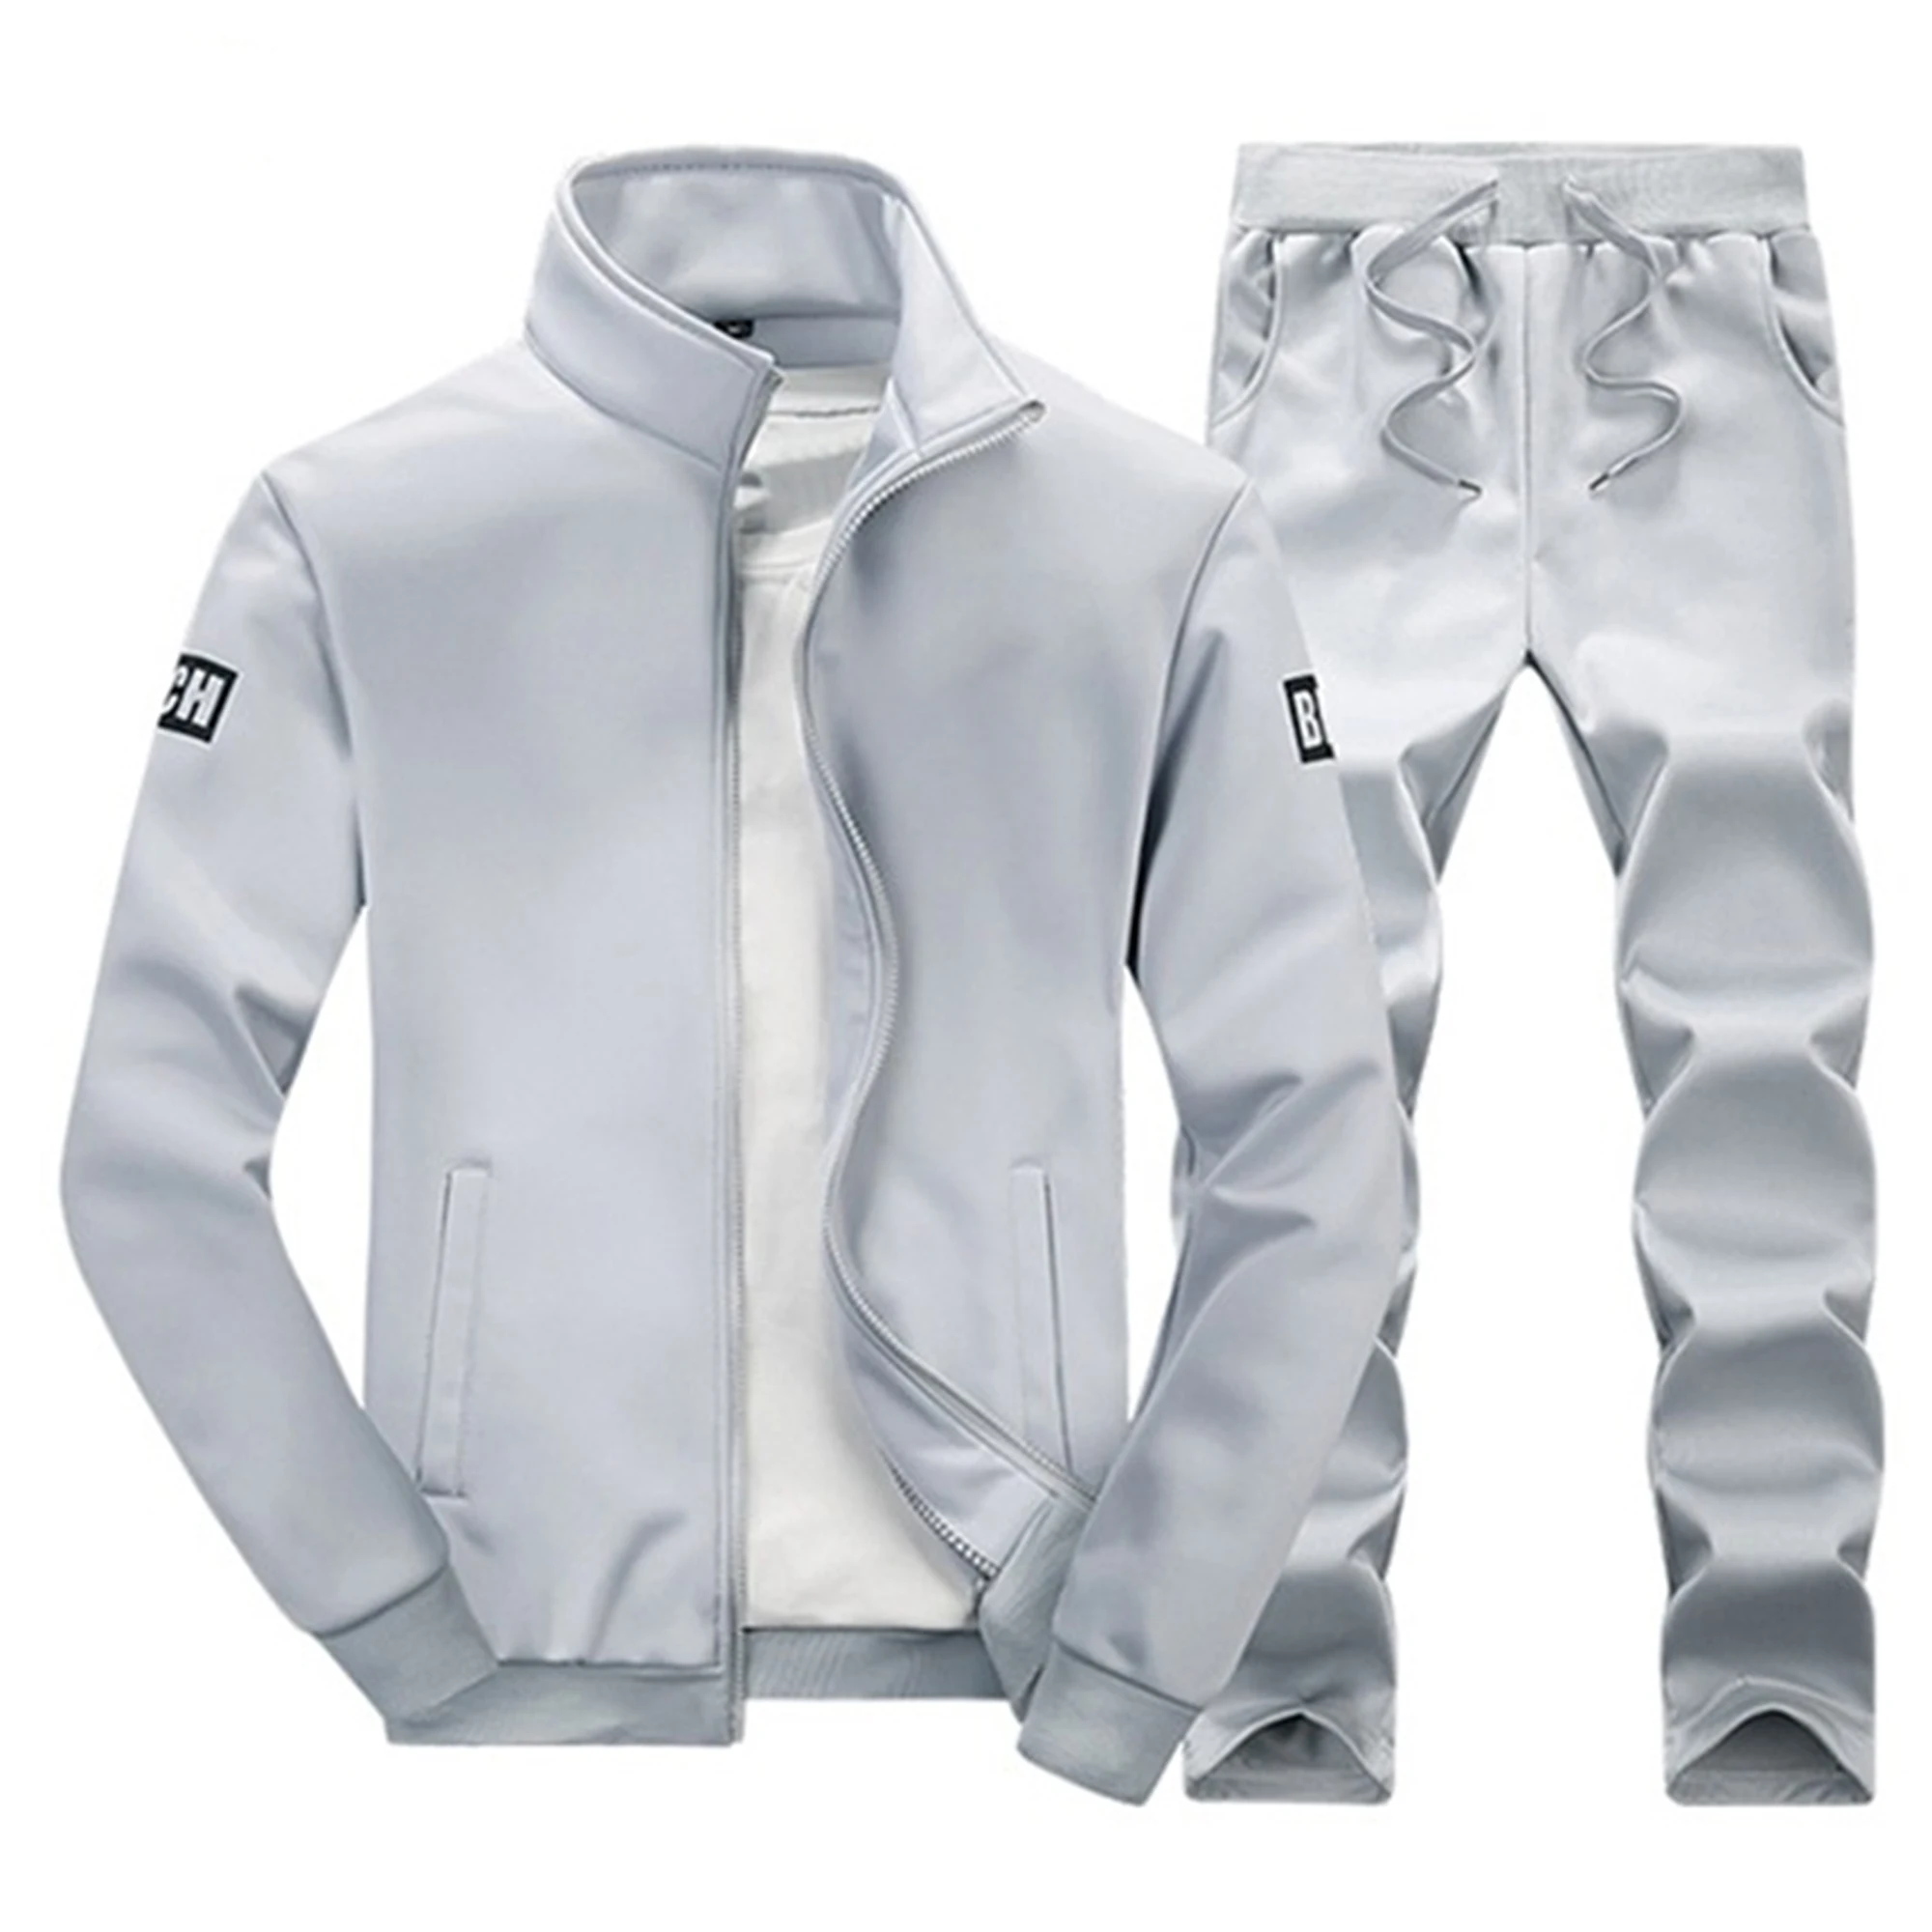 

customize logo design man clothing branded plain sports traning cotton tracksuits jacket gold joggers sets track suits for mens, Black,white,blue or custom color